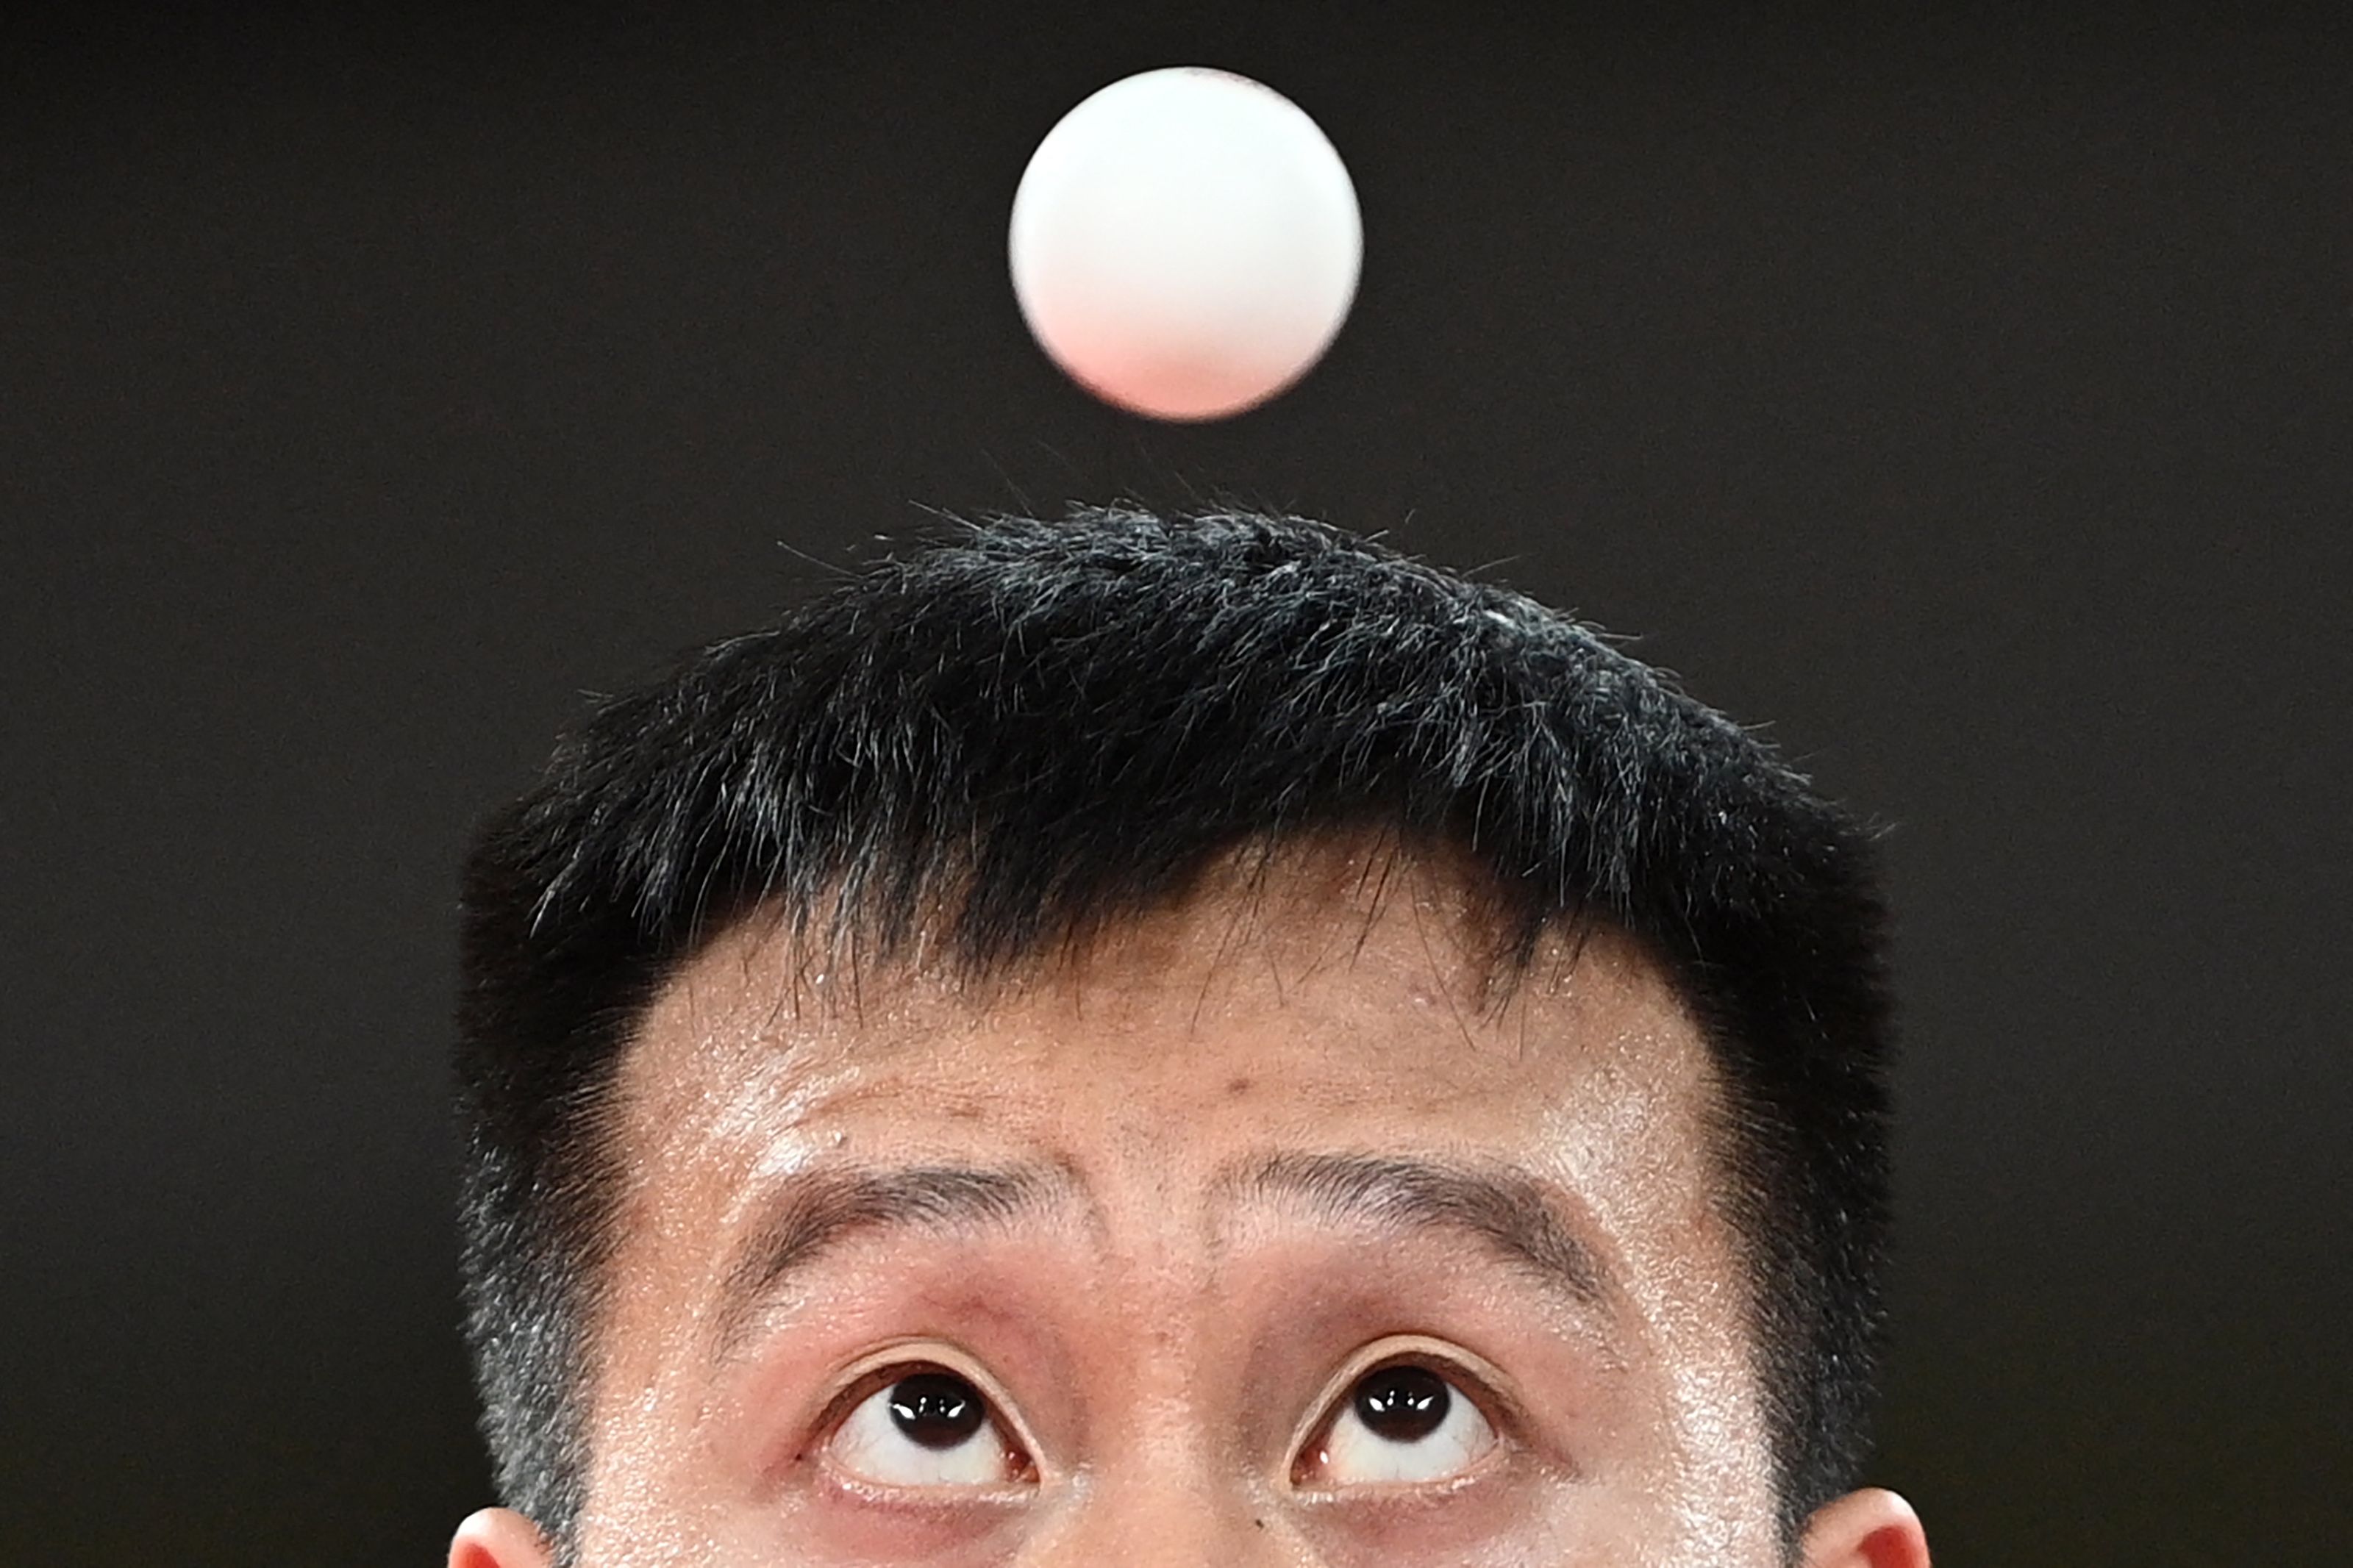 Slovakia's Yang Wang competes against Australia's Dave Powell during his men's singles round 2 table tennis match at the Tokyo Metropolitan Gymnasium during the Tokyo 2020 Olympic Games on July 26